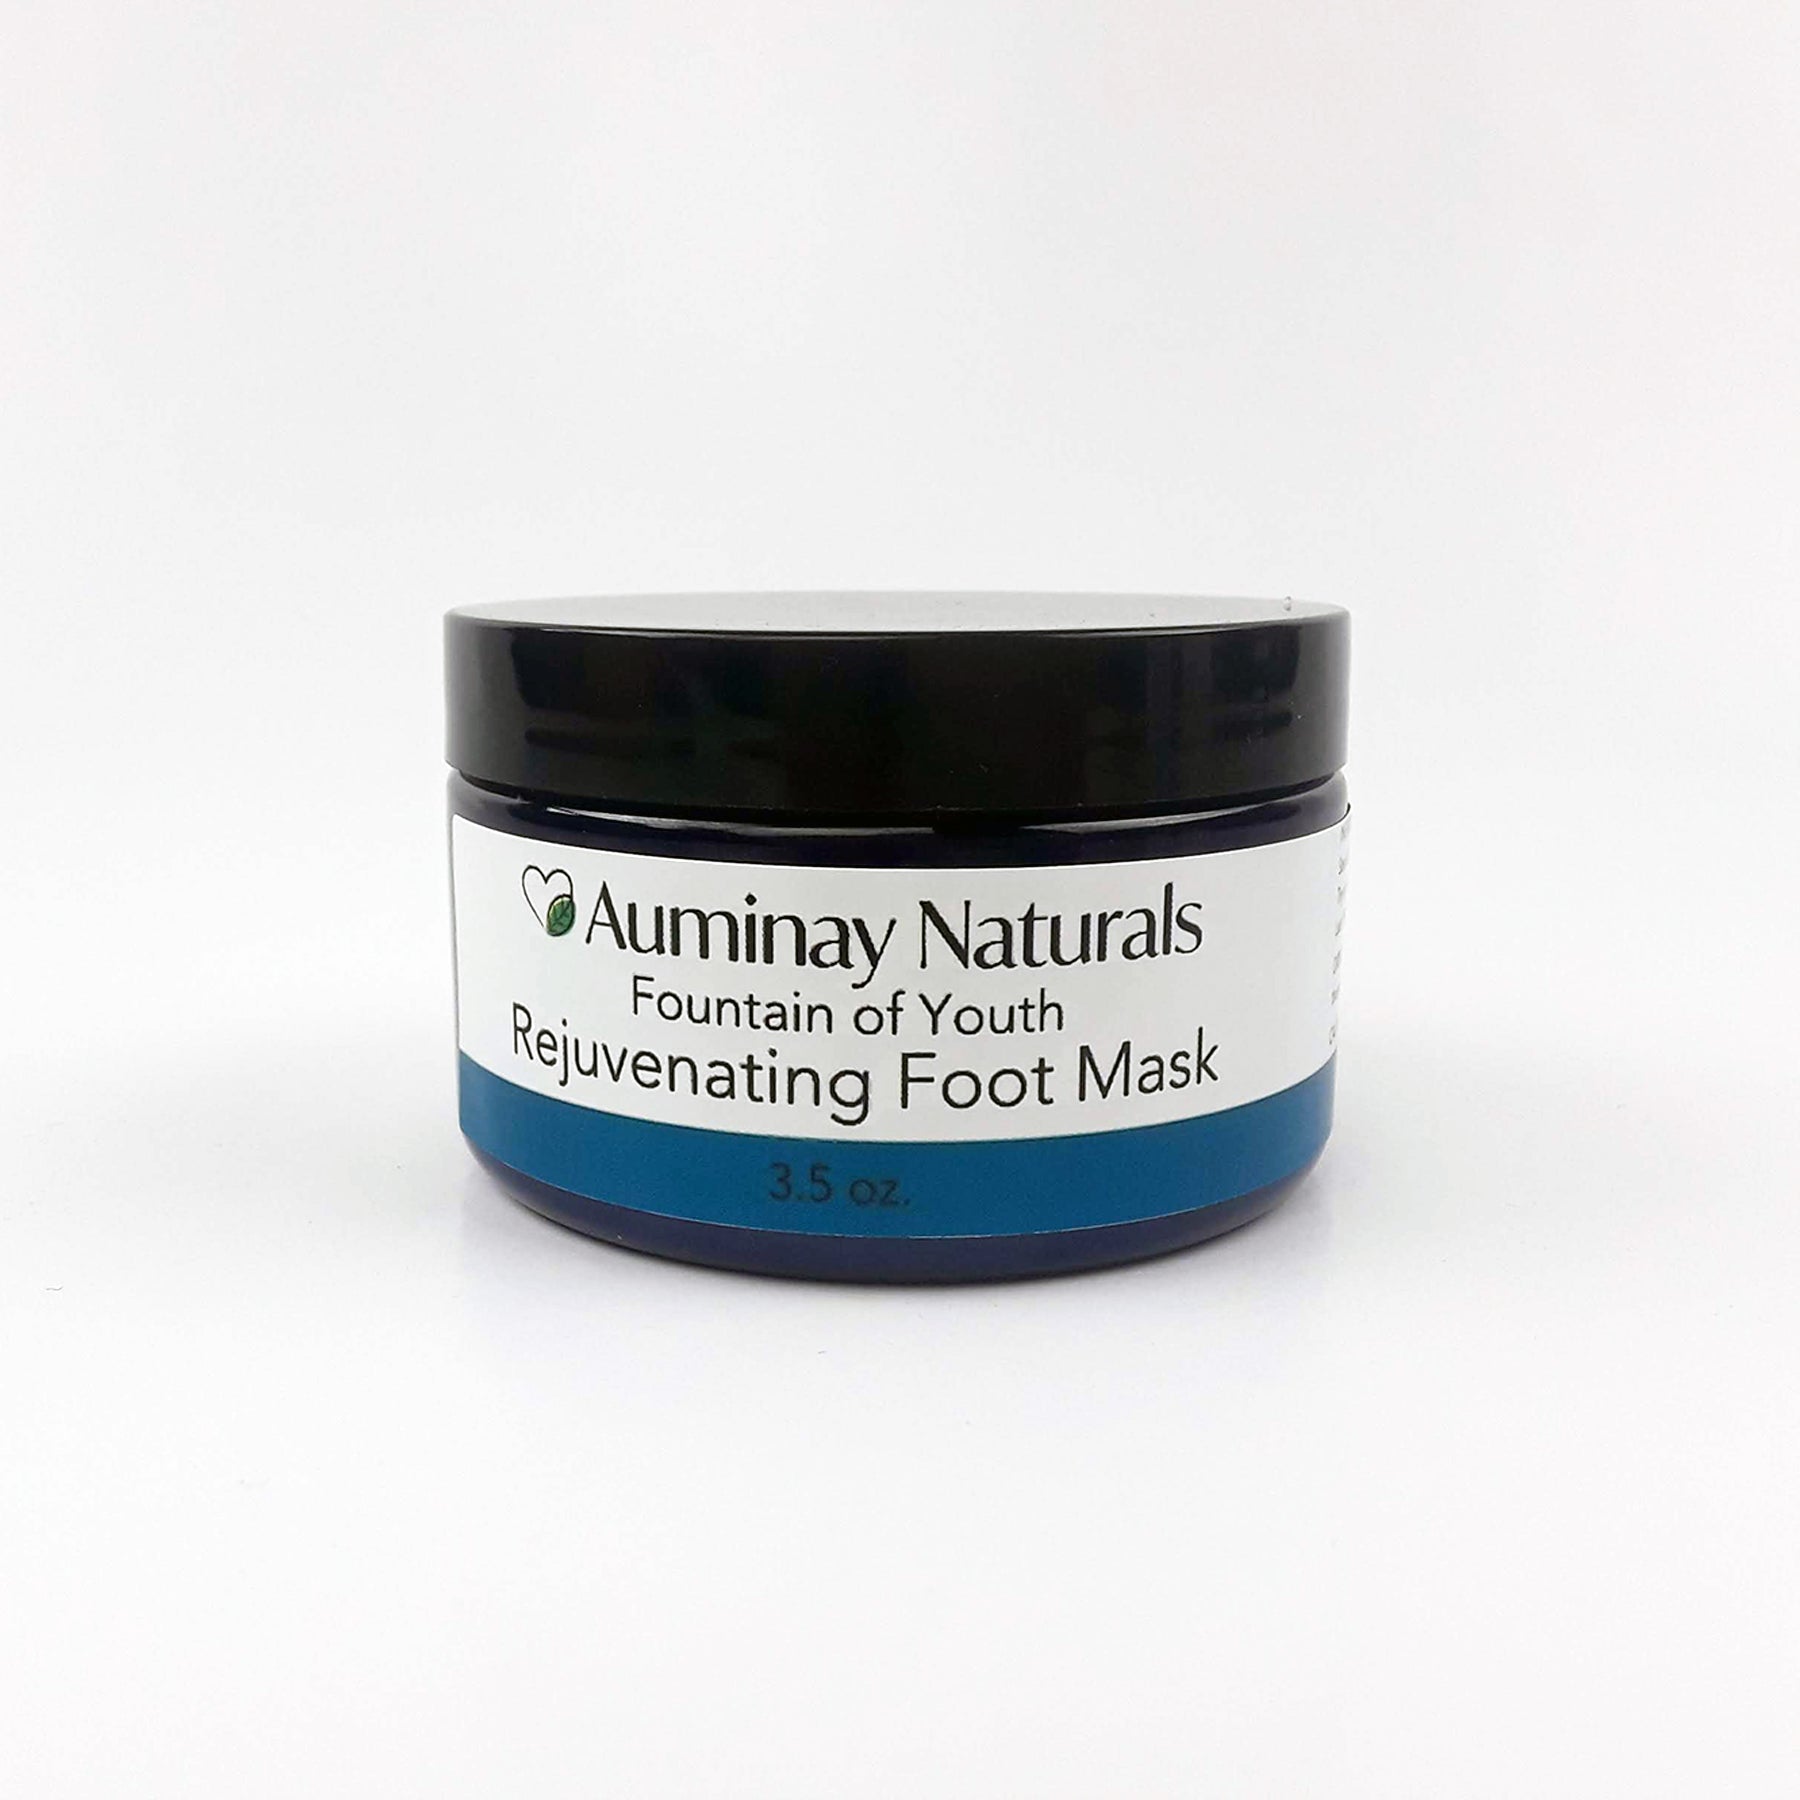 Rejuvenating Foot Mask - Fountain of Youth